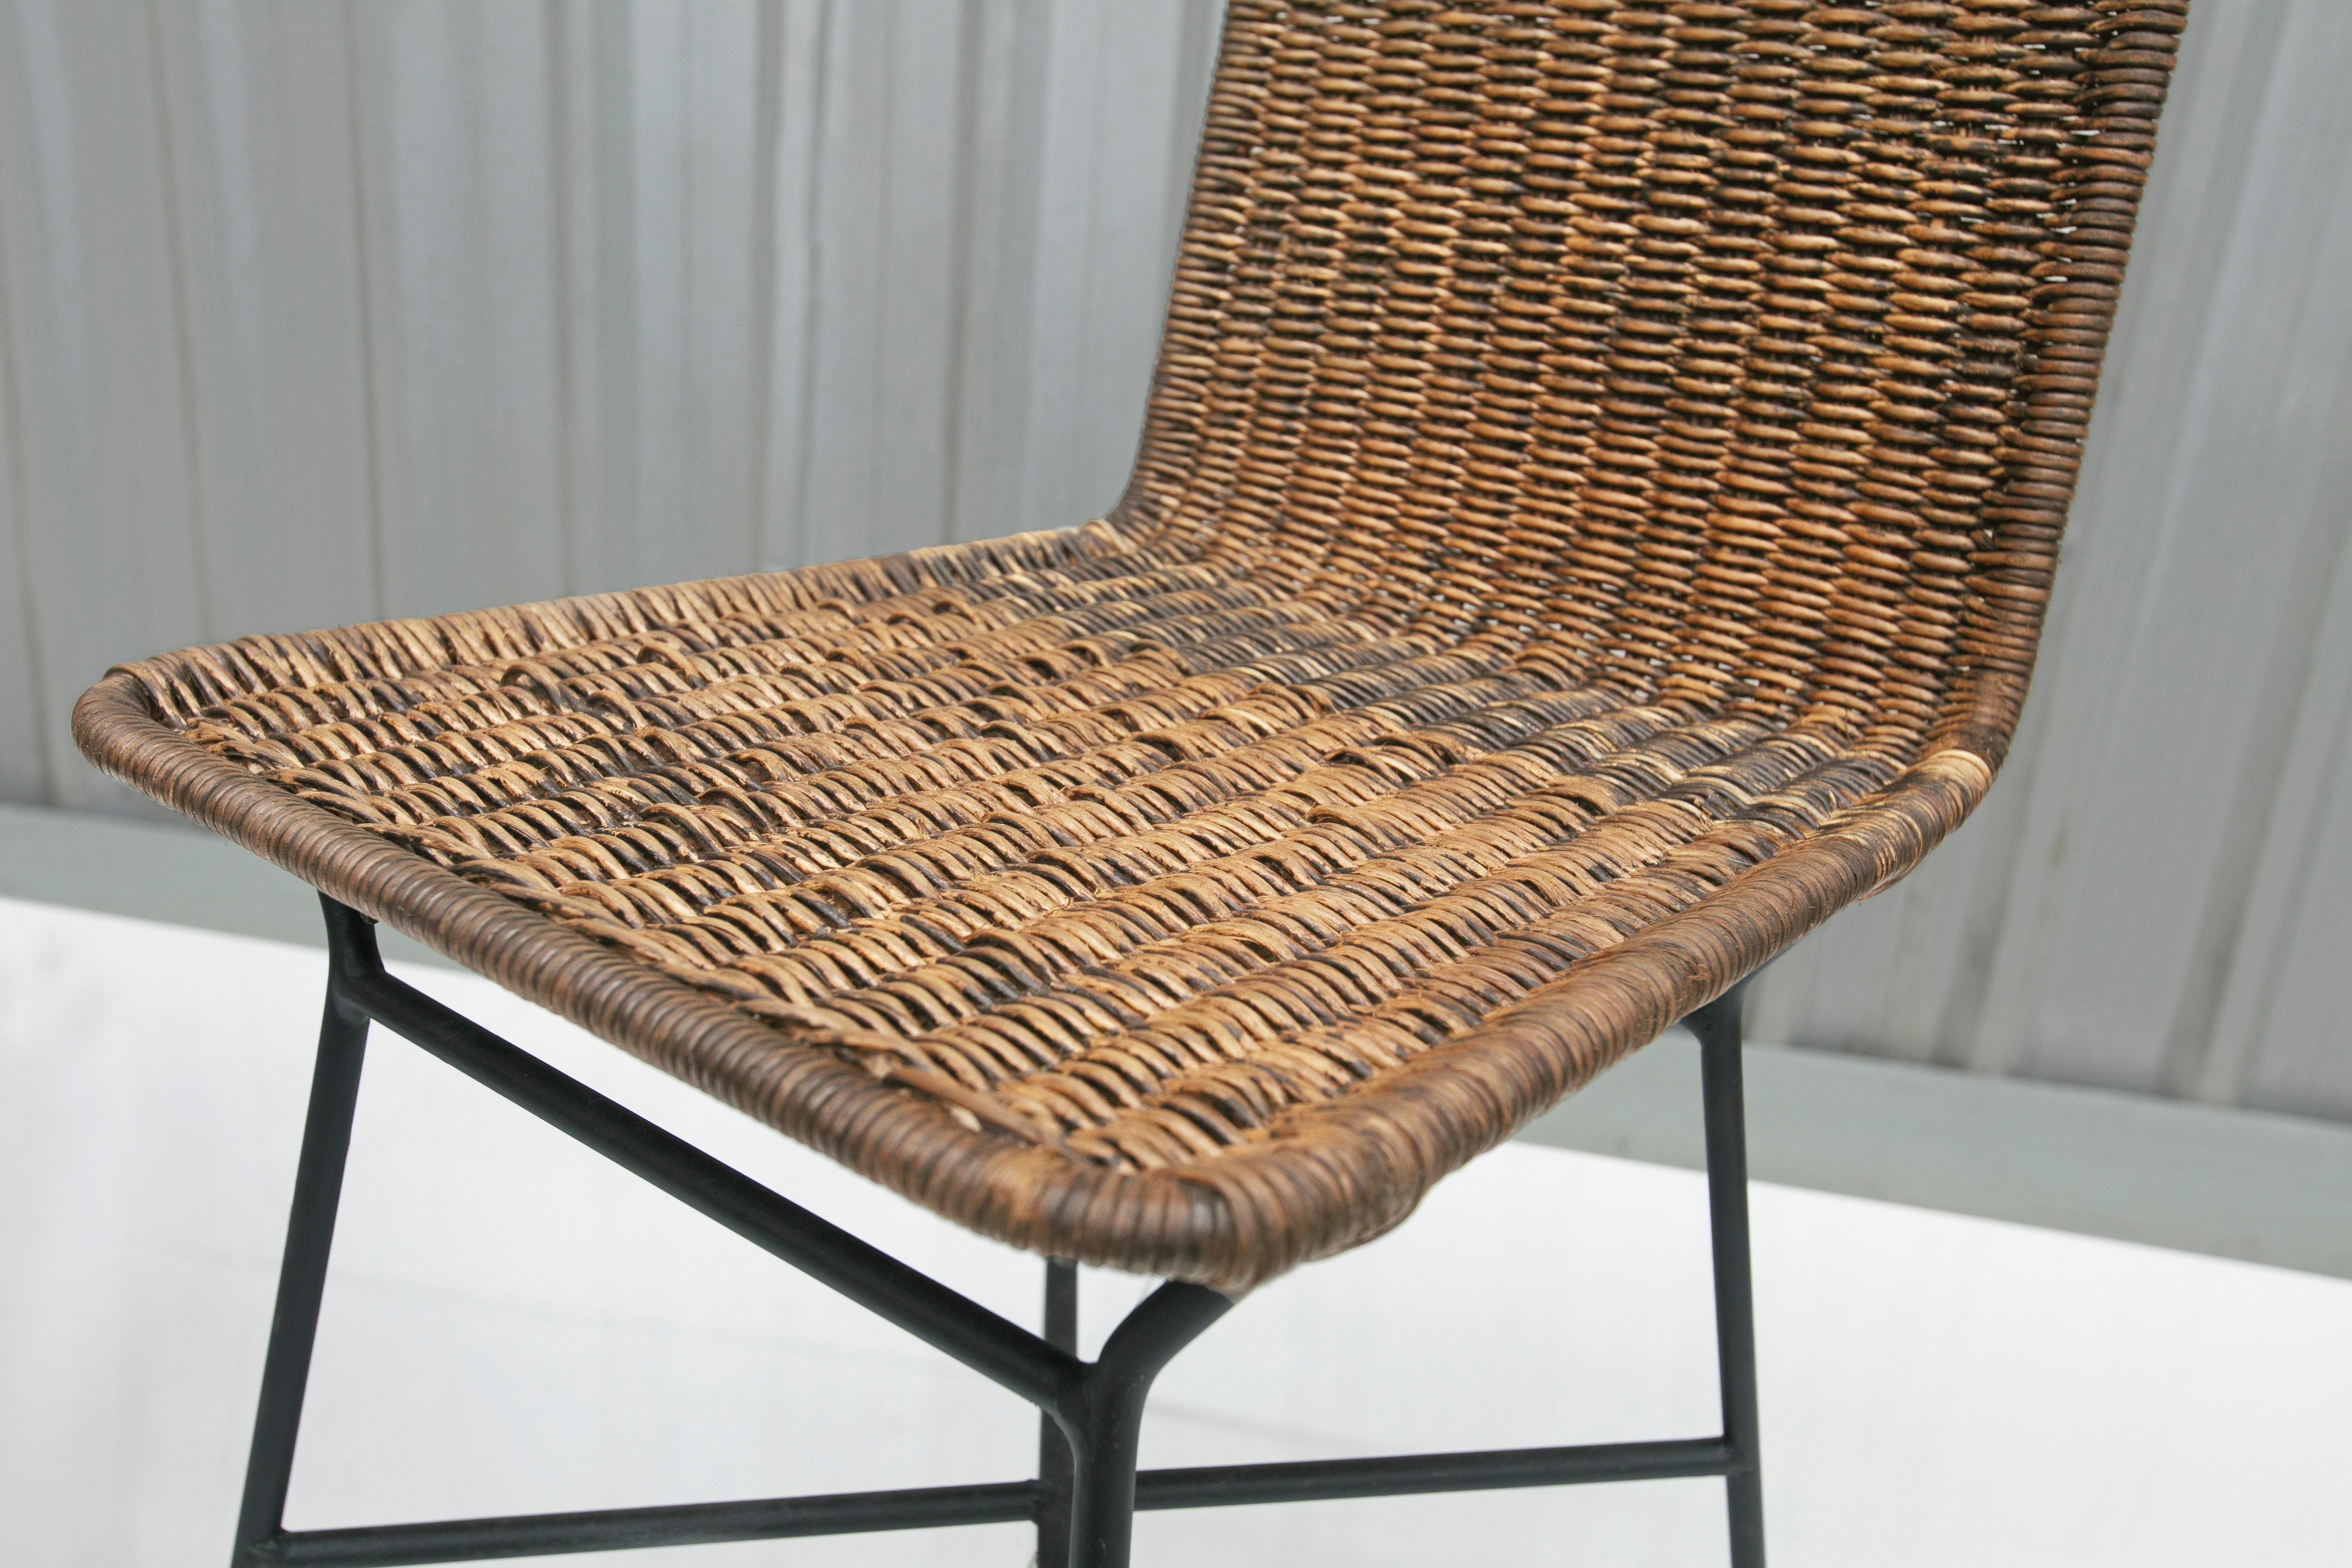 Cane Brazilian Modern Chairs in Caning and Metal by Carlo Hauner, 1950s, Brazil For Sale